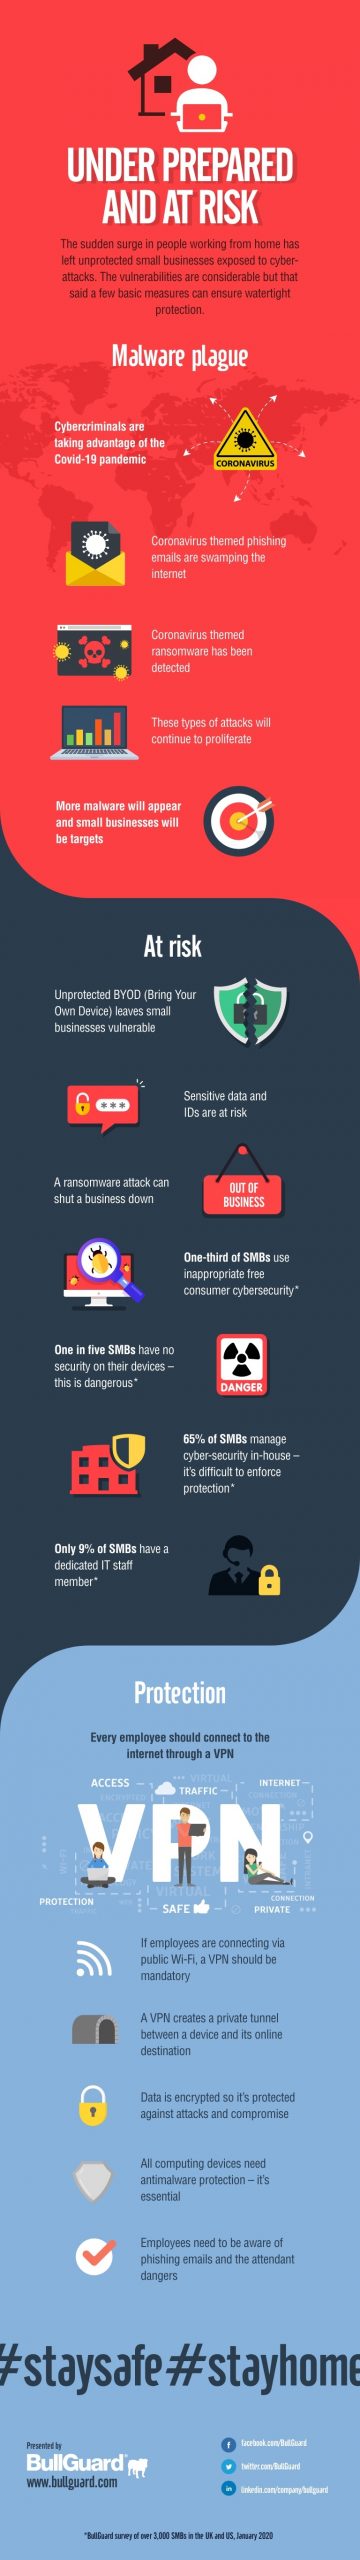 Remote Work Risks for Small Businesses [Infographic]